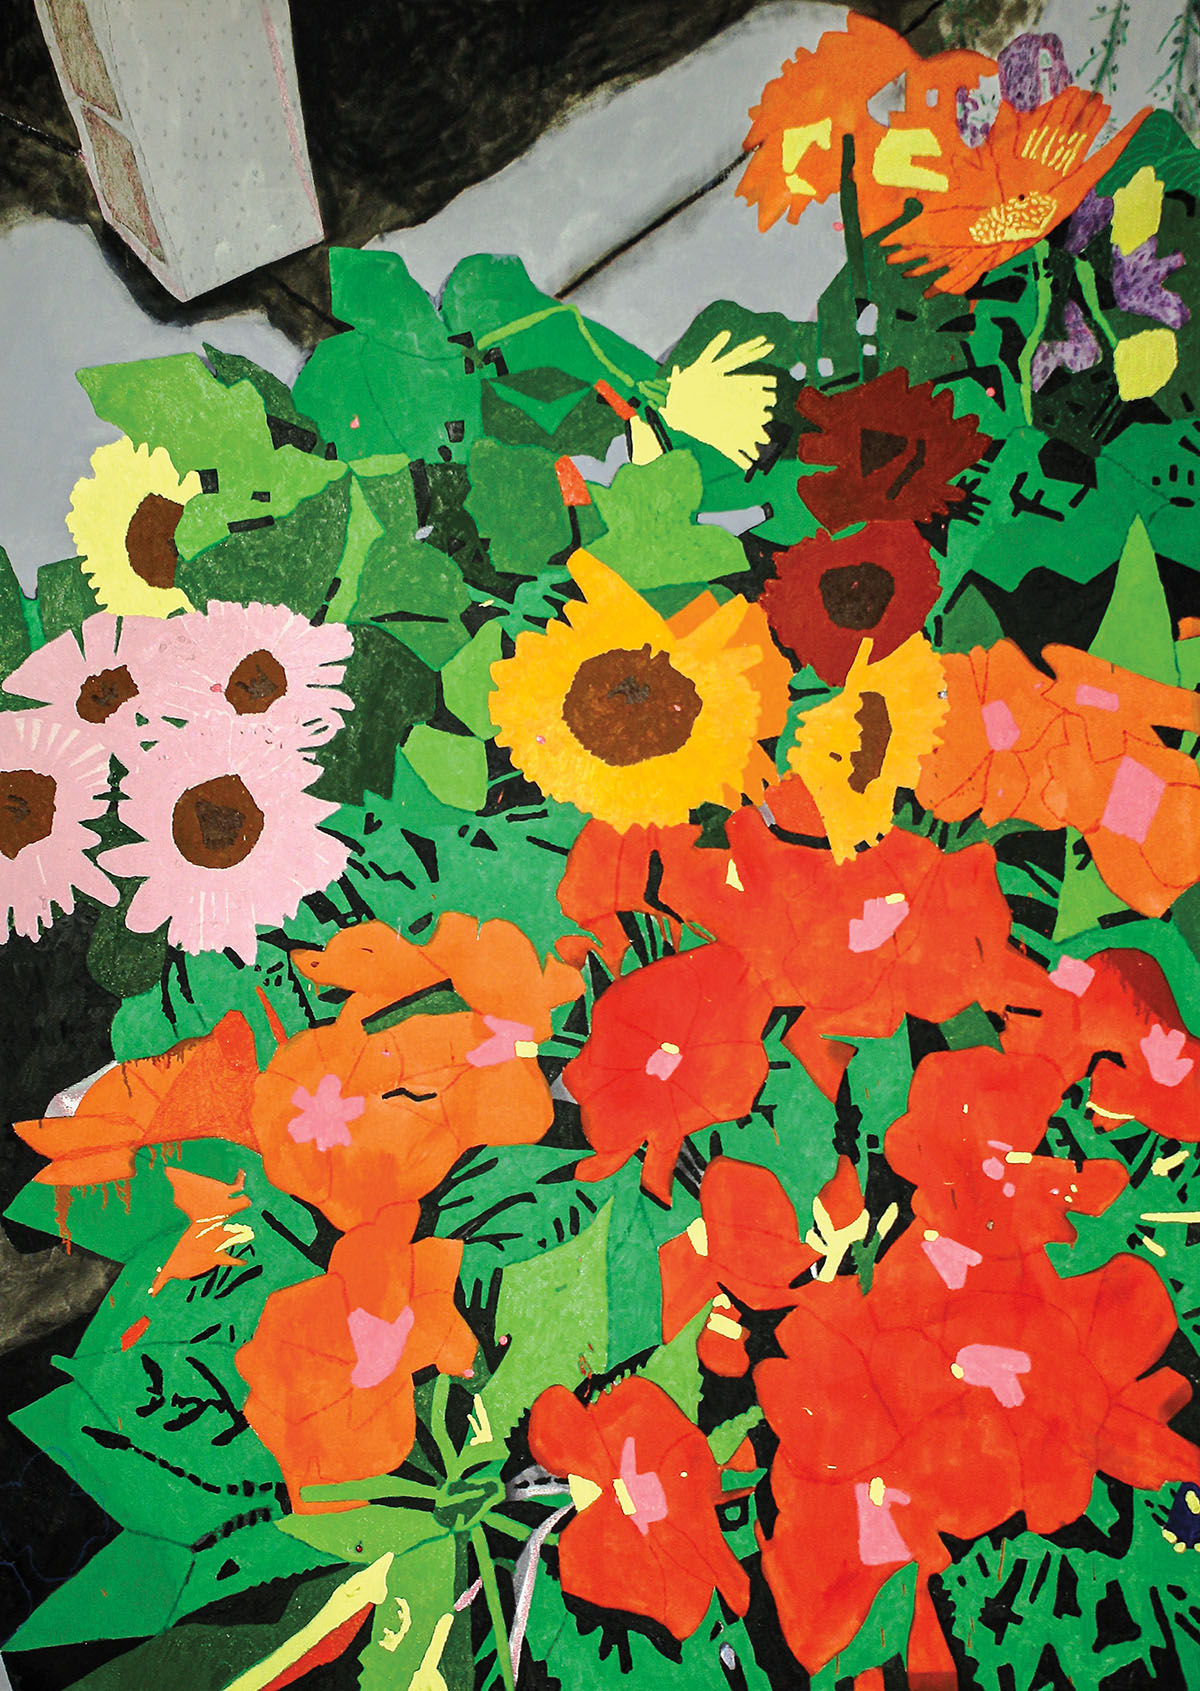 A brightly colored oil painting of red, orange and pink flowers with green stems